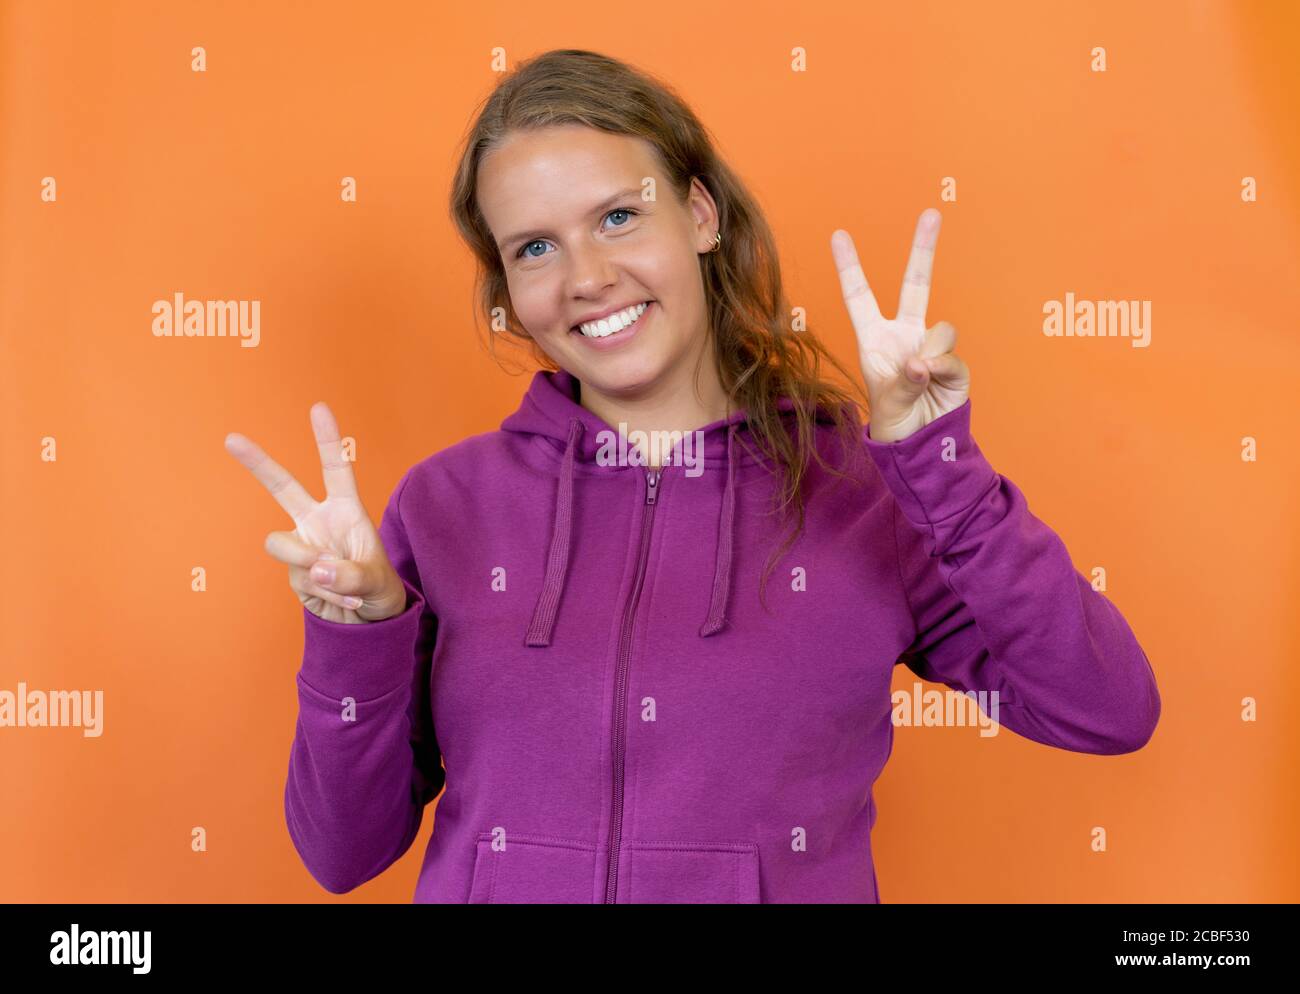 Blond german young adult woman with hoody showing victory gesture isolated on orange background Stock Photo